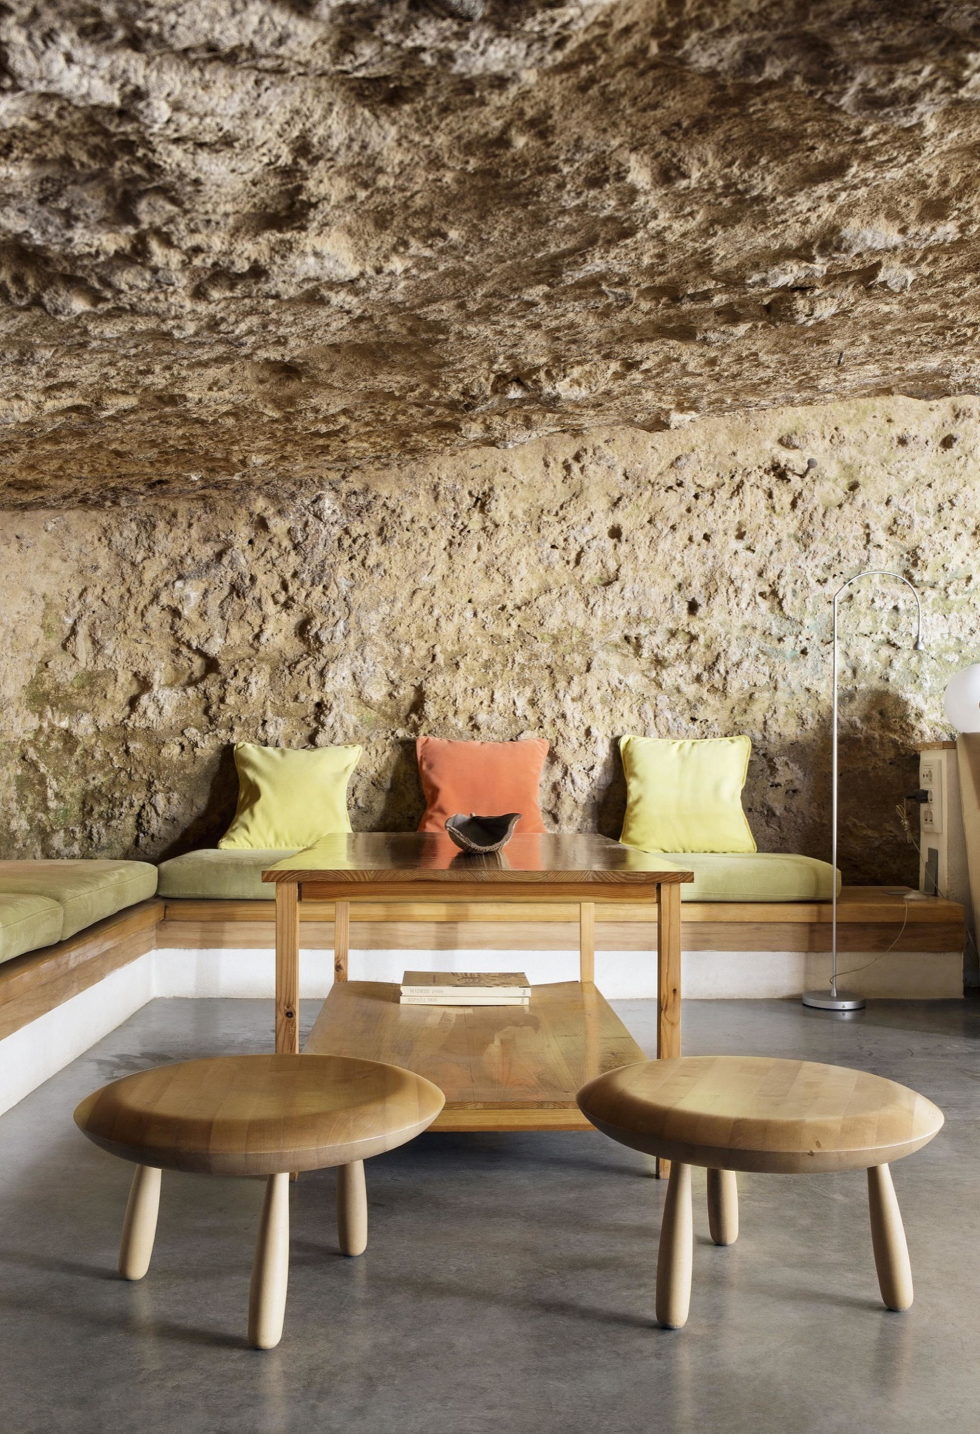 House Cave The Unusual Residence in Spain 8